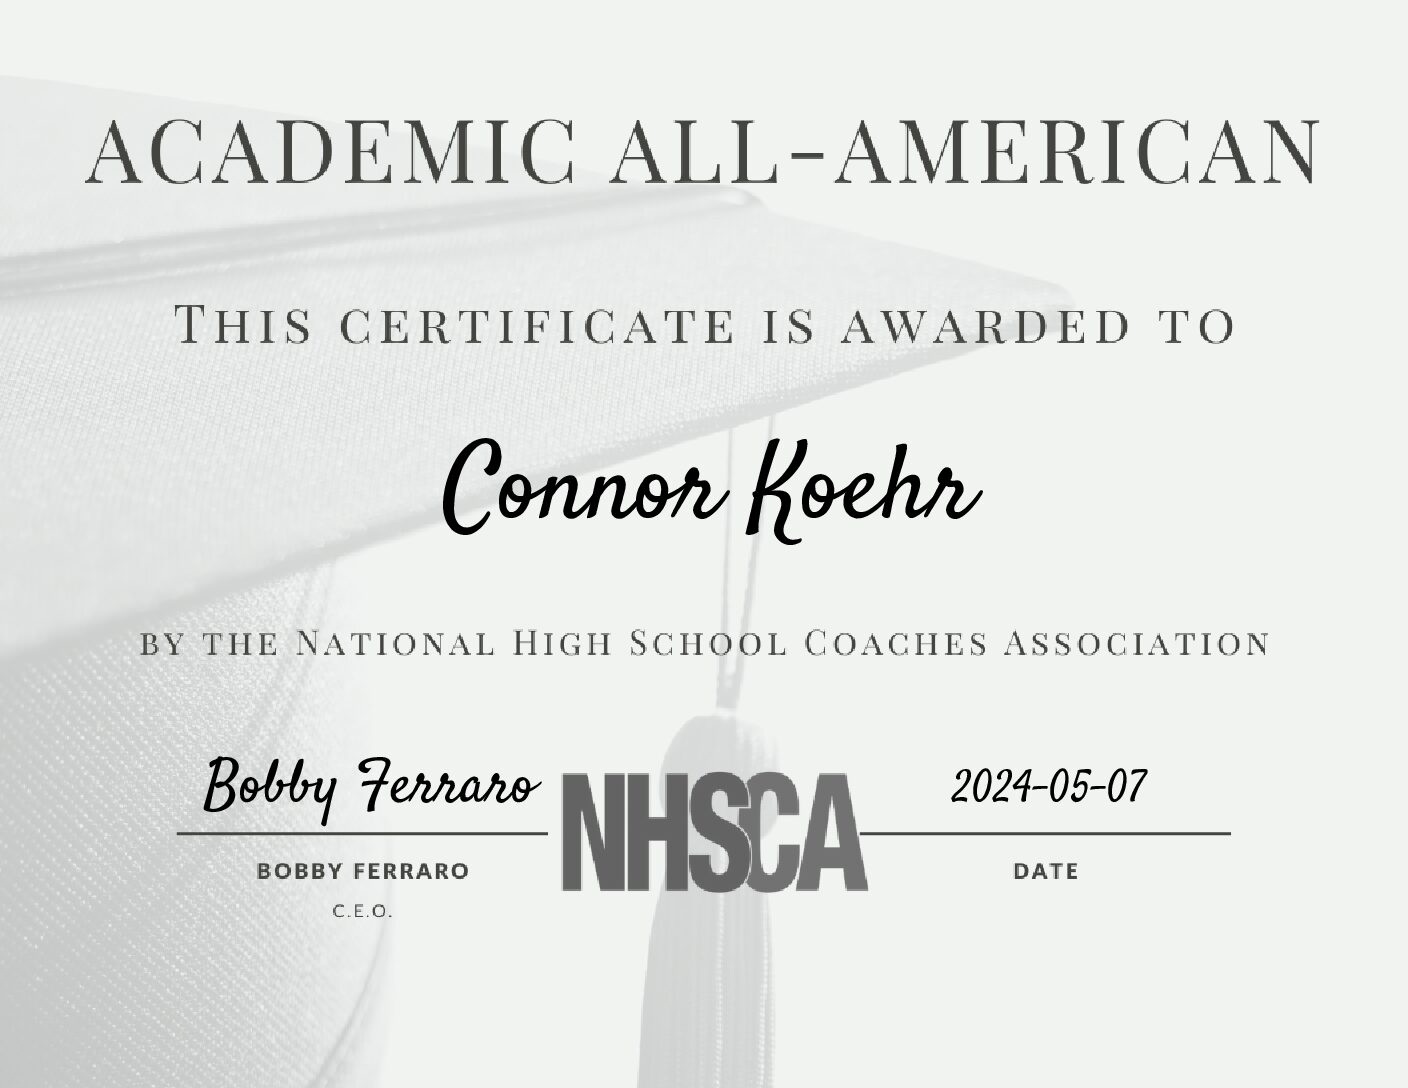 Congratulations to Connor Koehr – NHSCA Academic All-American